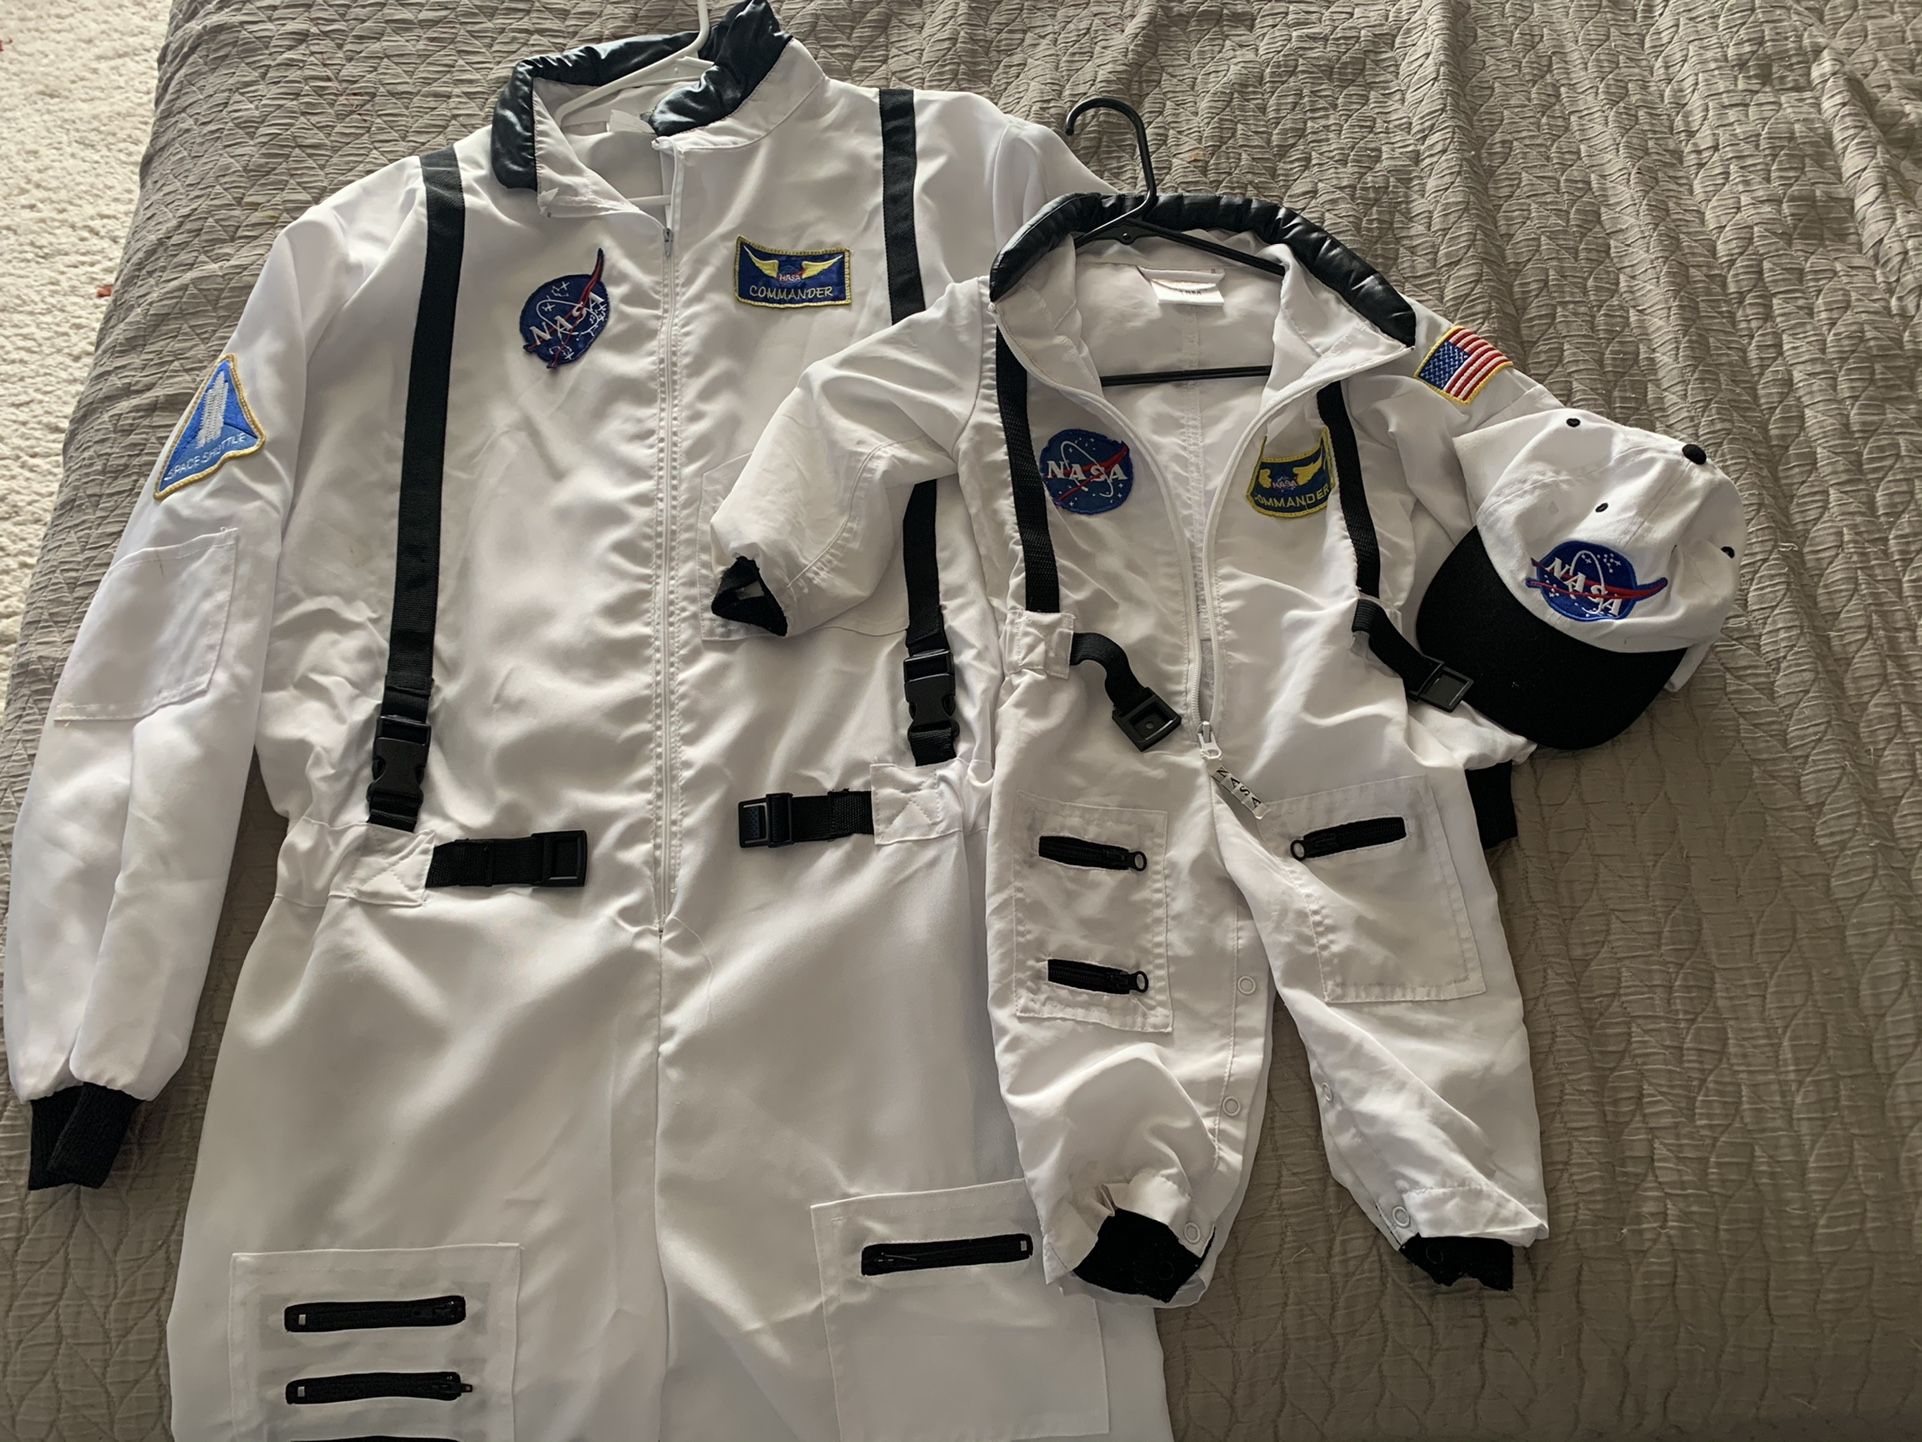 Matching adult and baby/toddler astronaut costumes, perfect for Halloween or a themed party. Baby/toddler size 18m but fit out 24 month old, adult is 